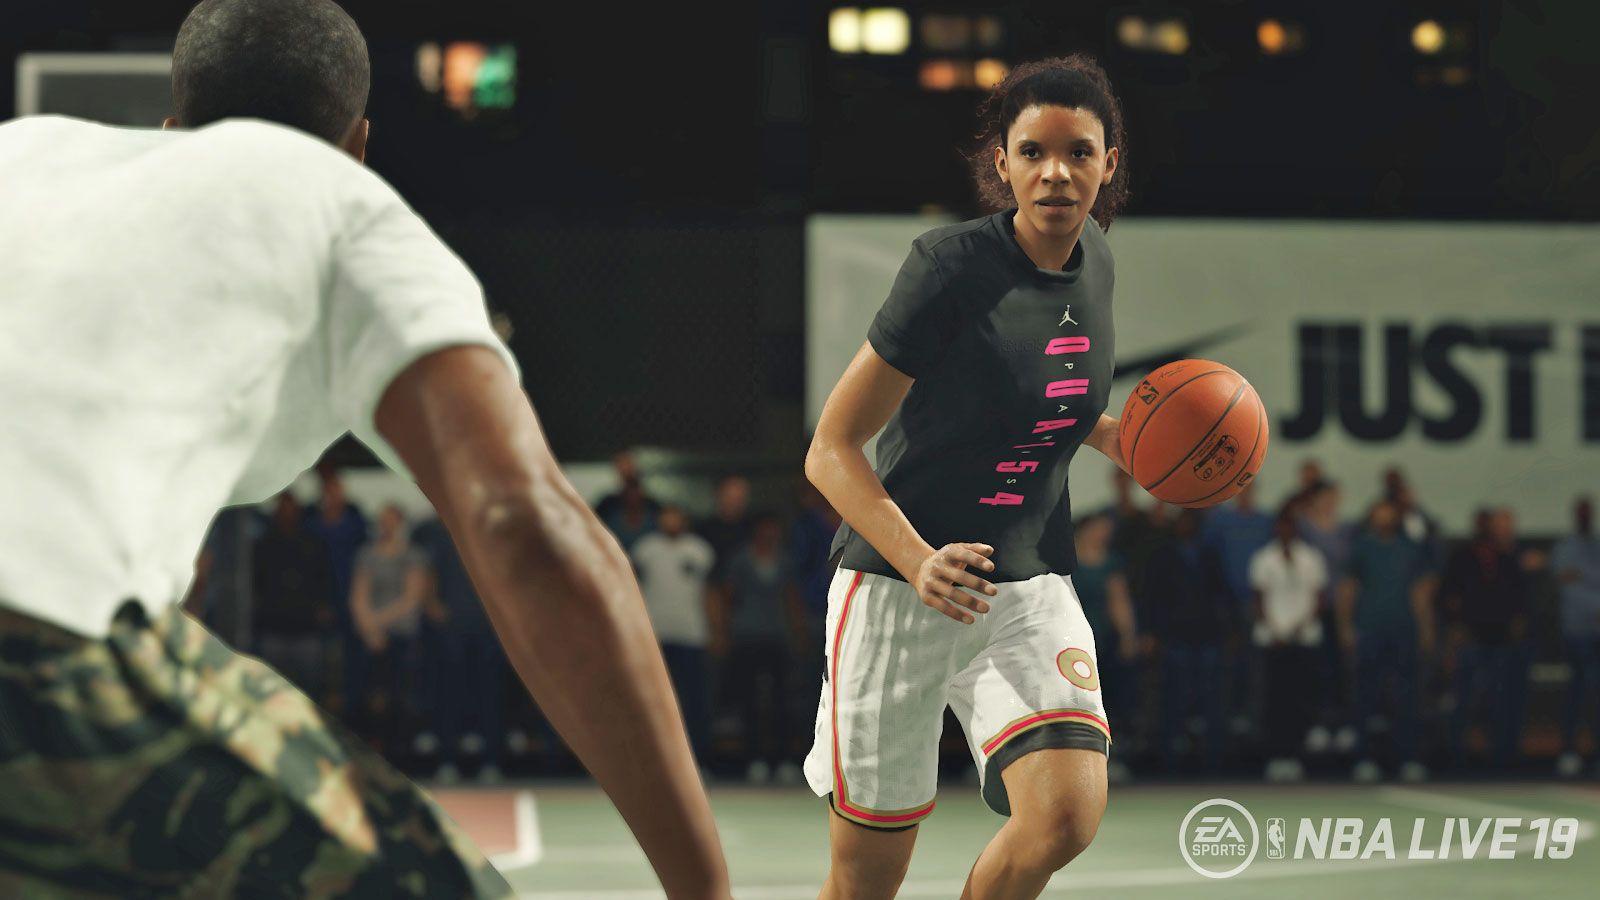 NBA Live 19' will let you create female players